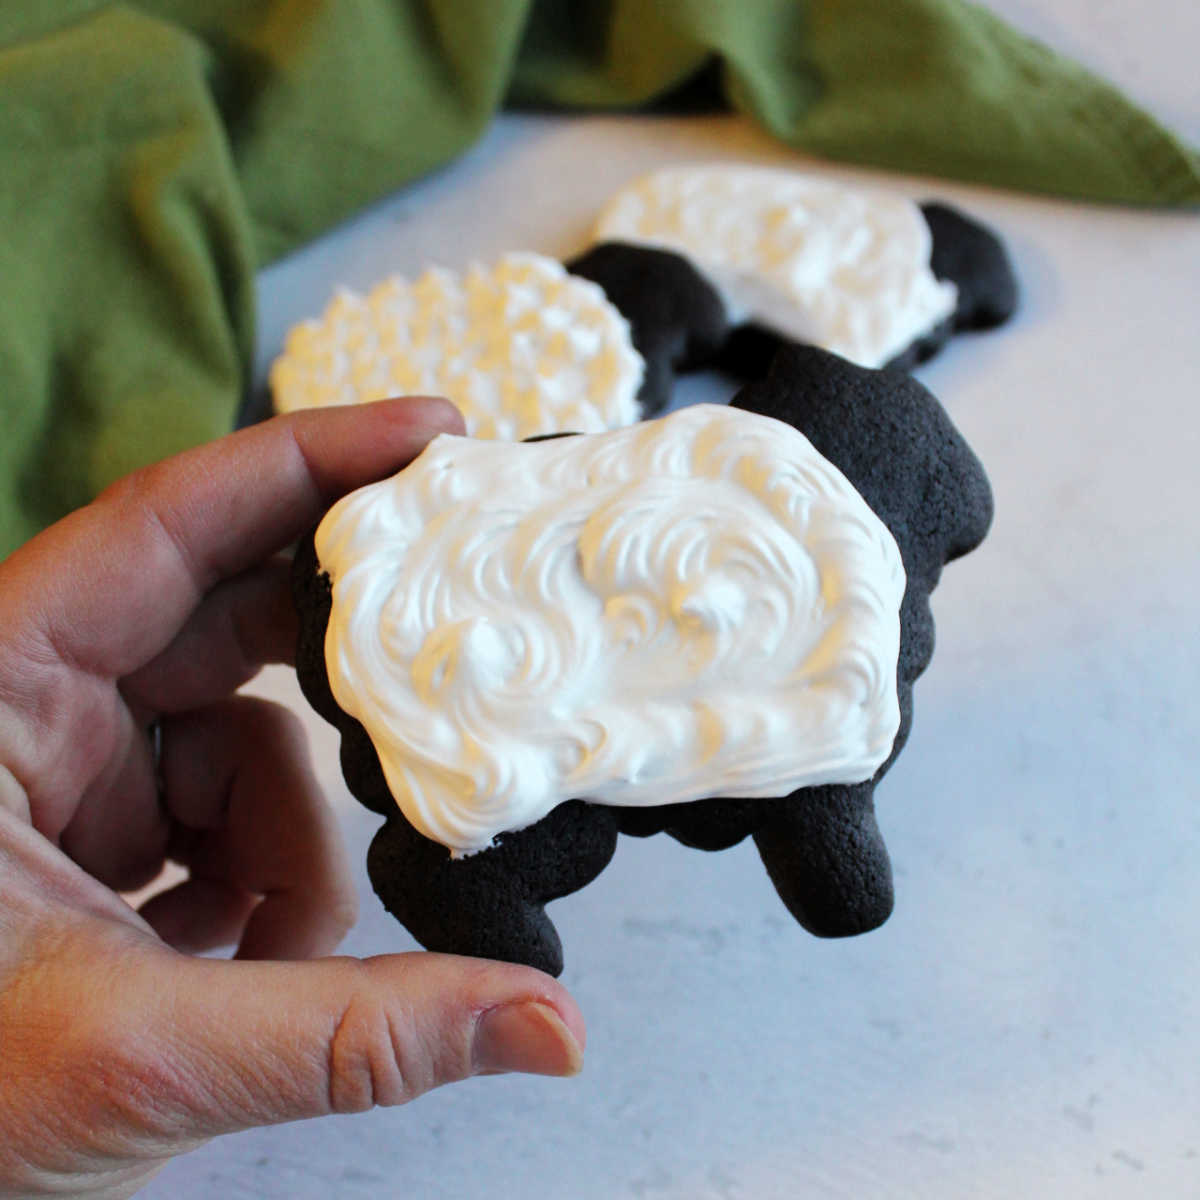 dark chocolate cookies in the shape of sheet with white royal icing fleece on top.